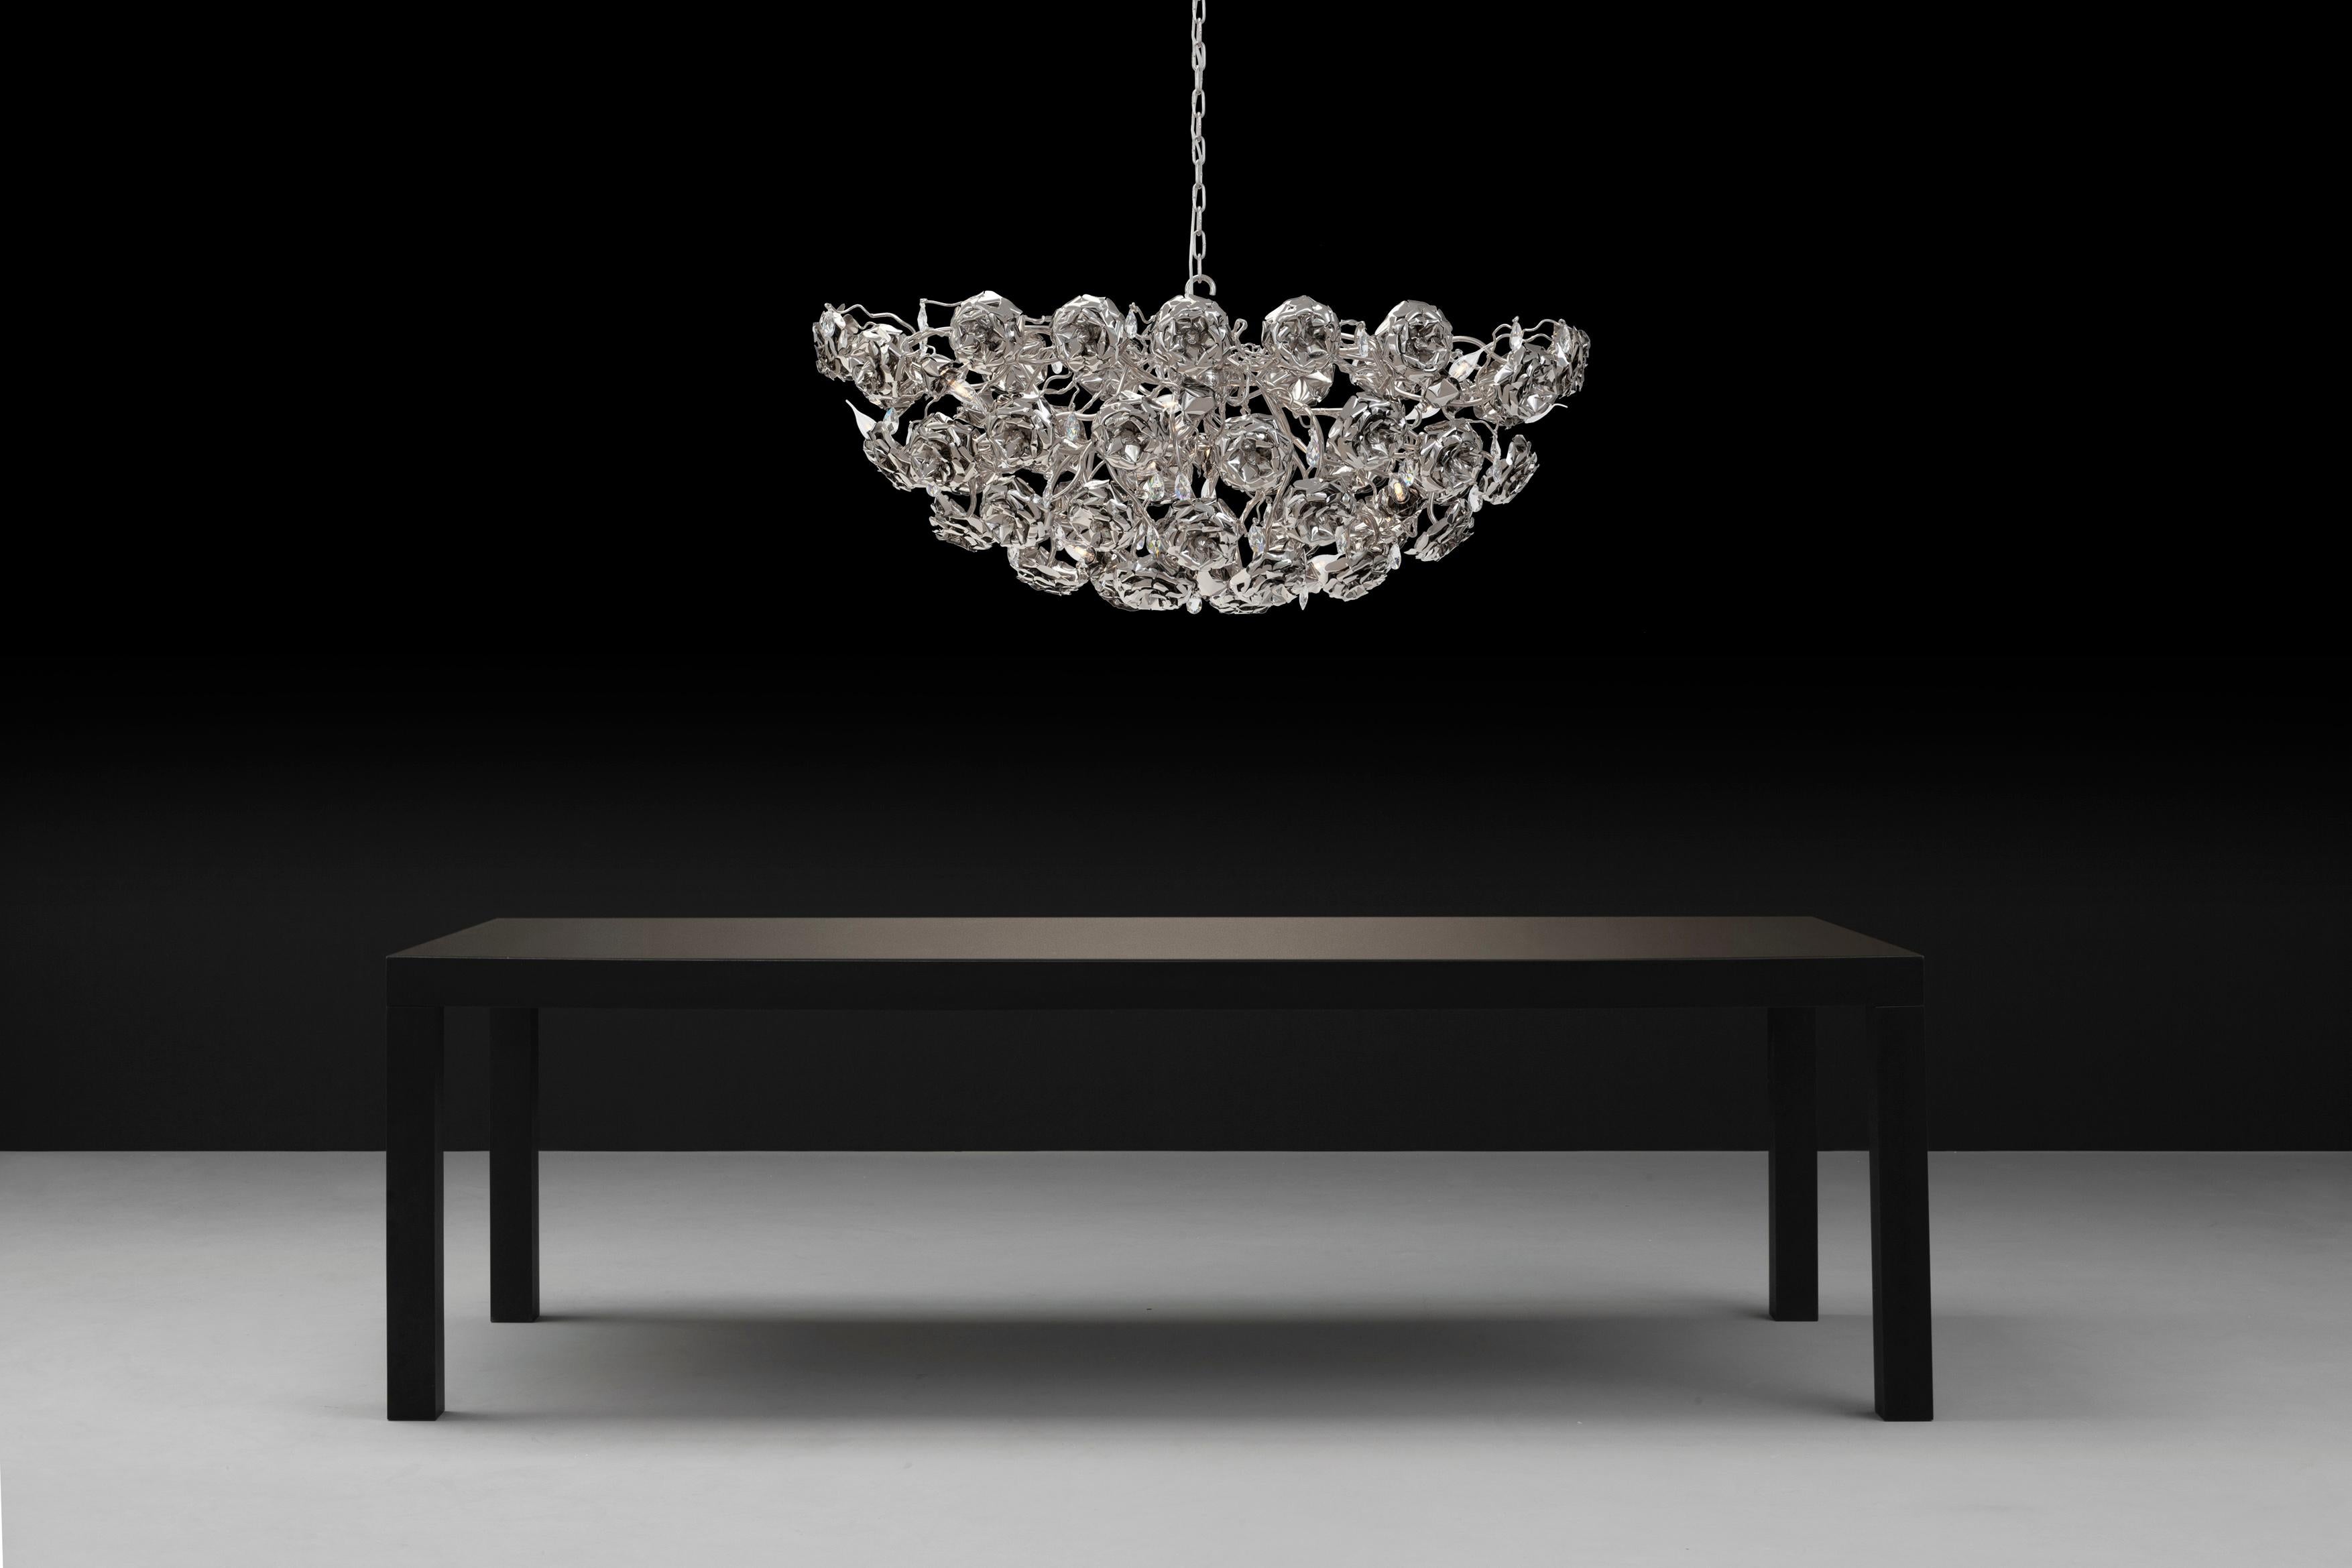 This modern chandelier in an oval shape and nickel finish is part of the Love You Love You Not collection, designed by William Brand, founder of Brand van Egmond. Evocative and eyecatching, between the handcrafted roses, sparkling crystals have been